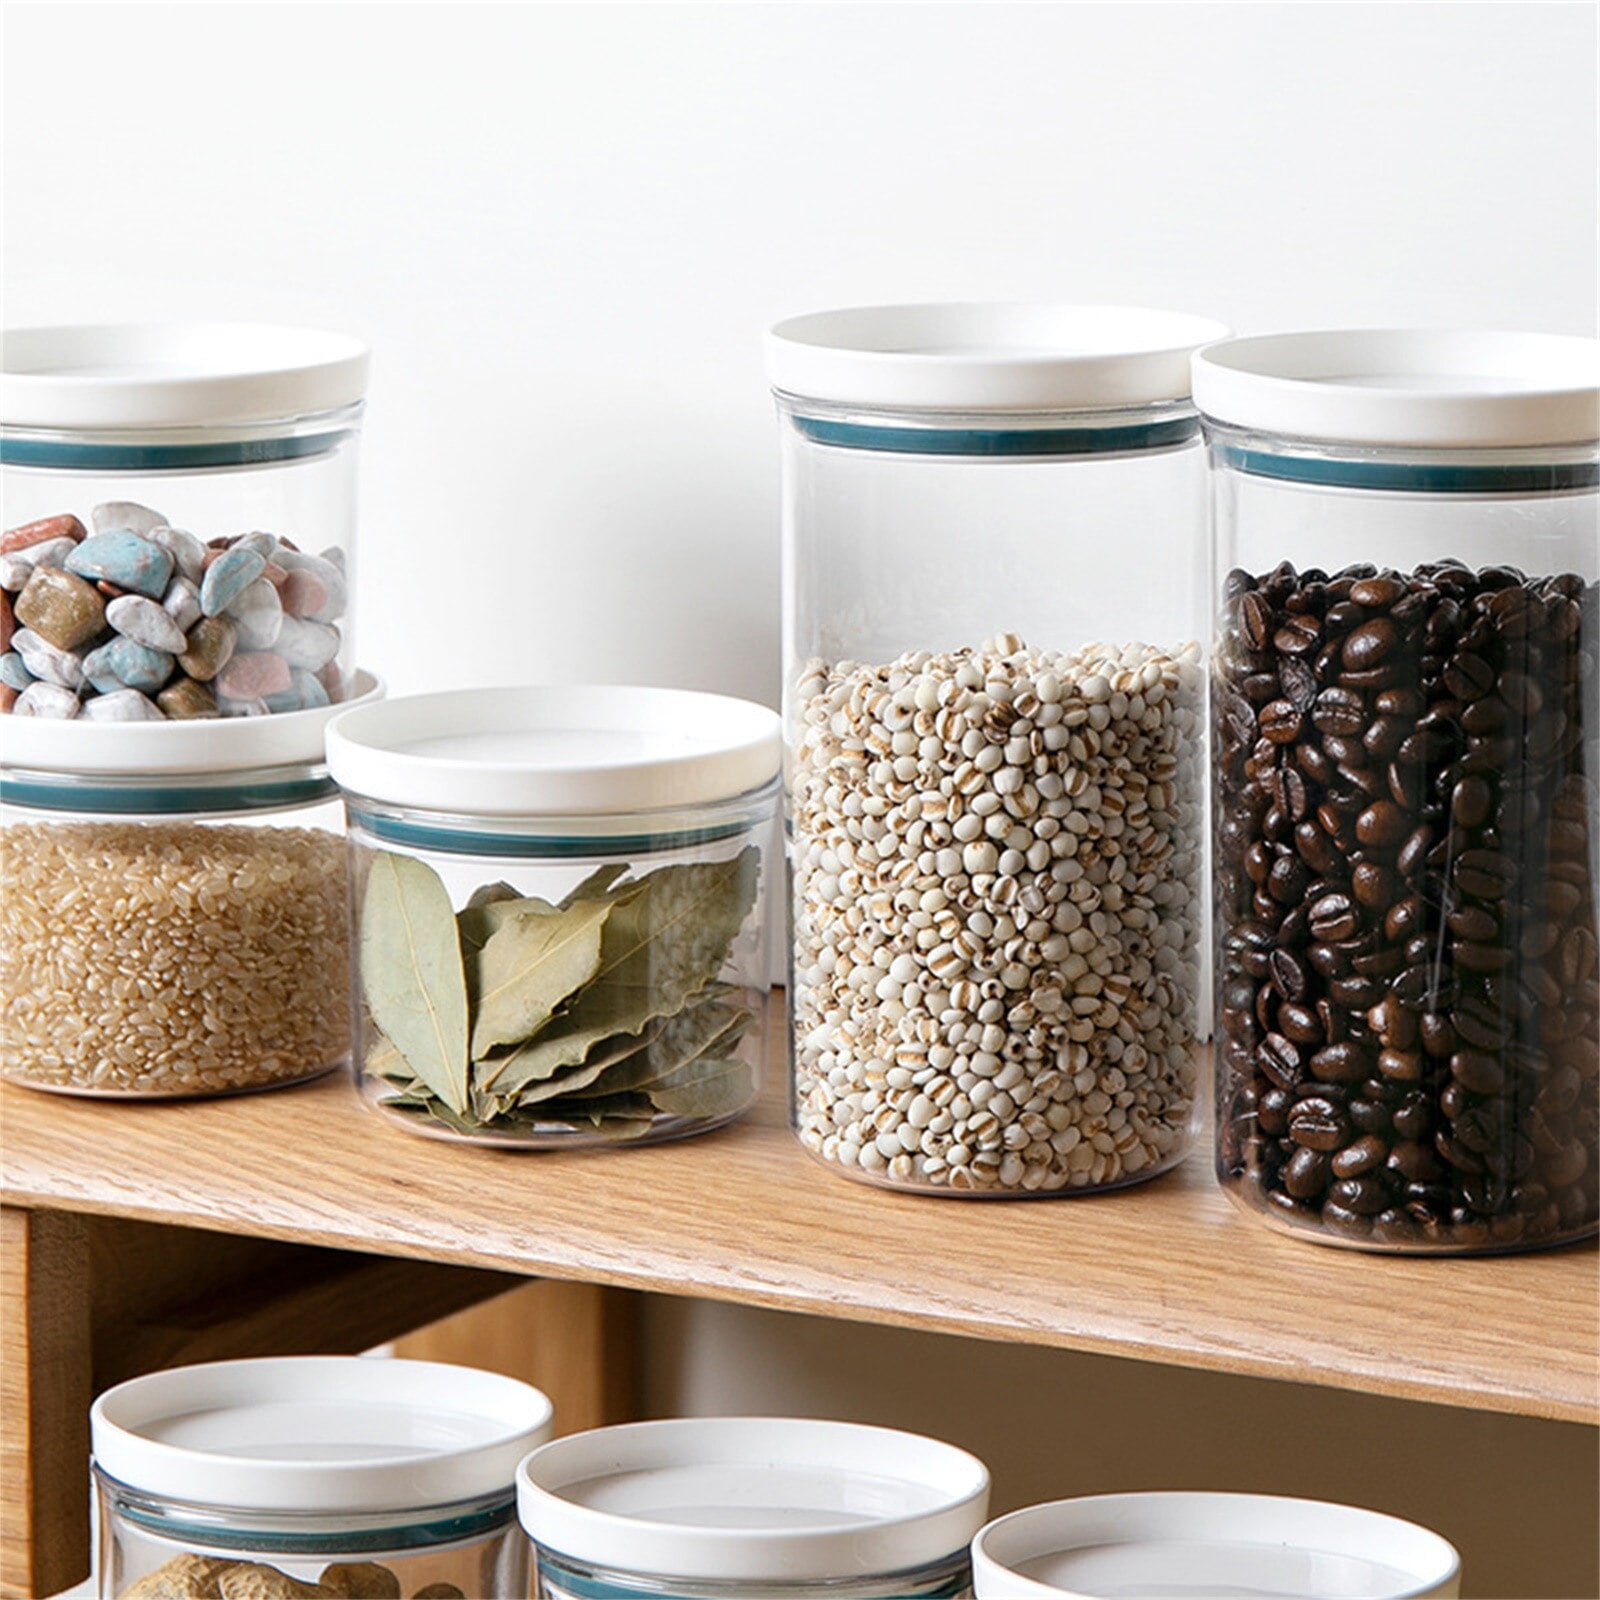 9pcs Airtight Food Storage Containers With Lids, Bpa-free Plastic Dry Food  Canisters For Kitchen Pantry Organization And Storage, Dishwasher Safe,  With Labels And Marker, For Cereals, Rice, Pasta, Tea, Nuts